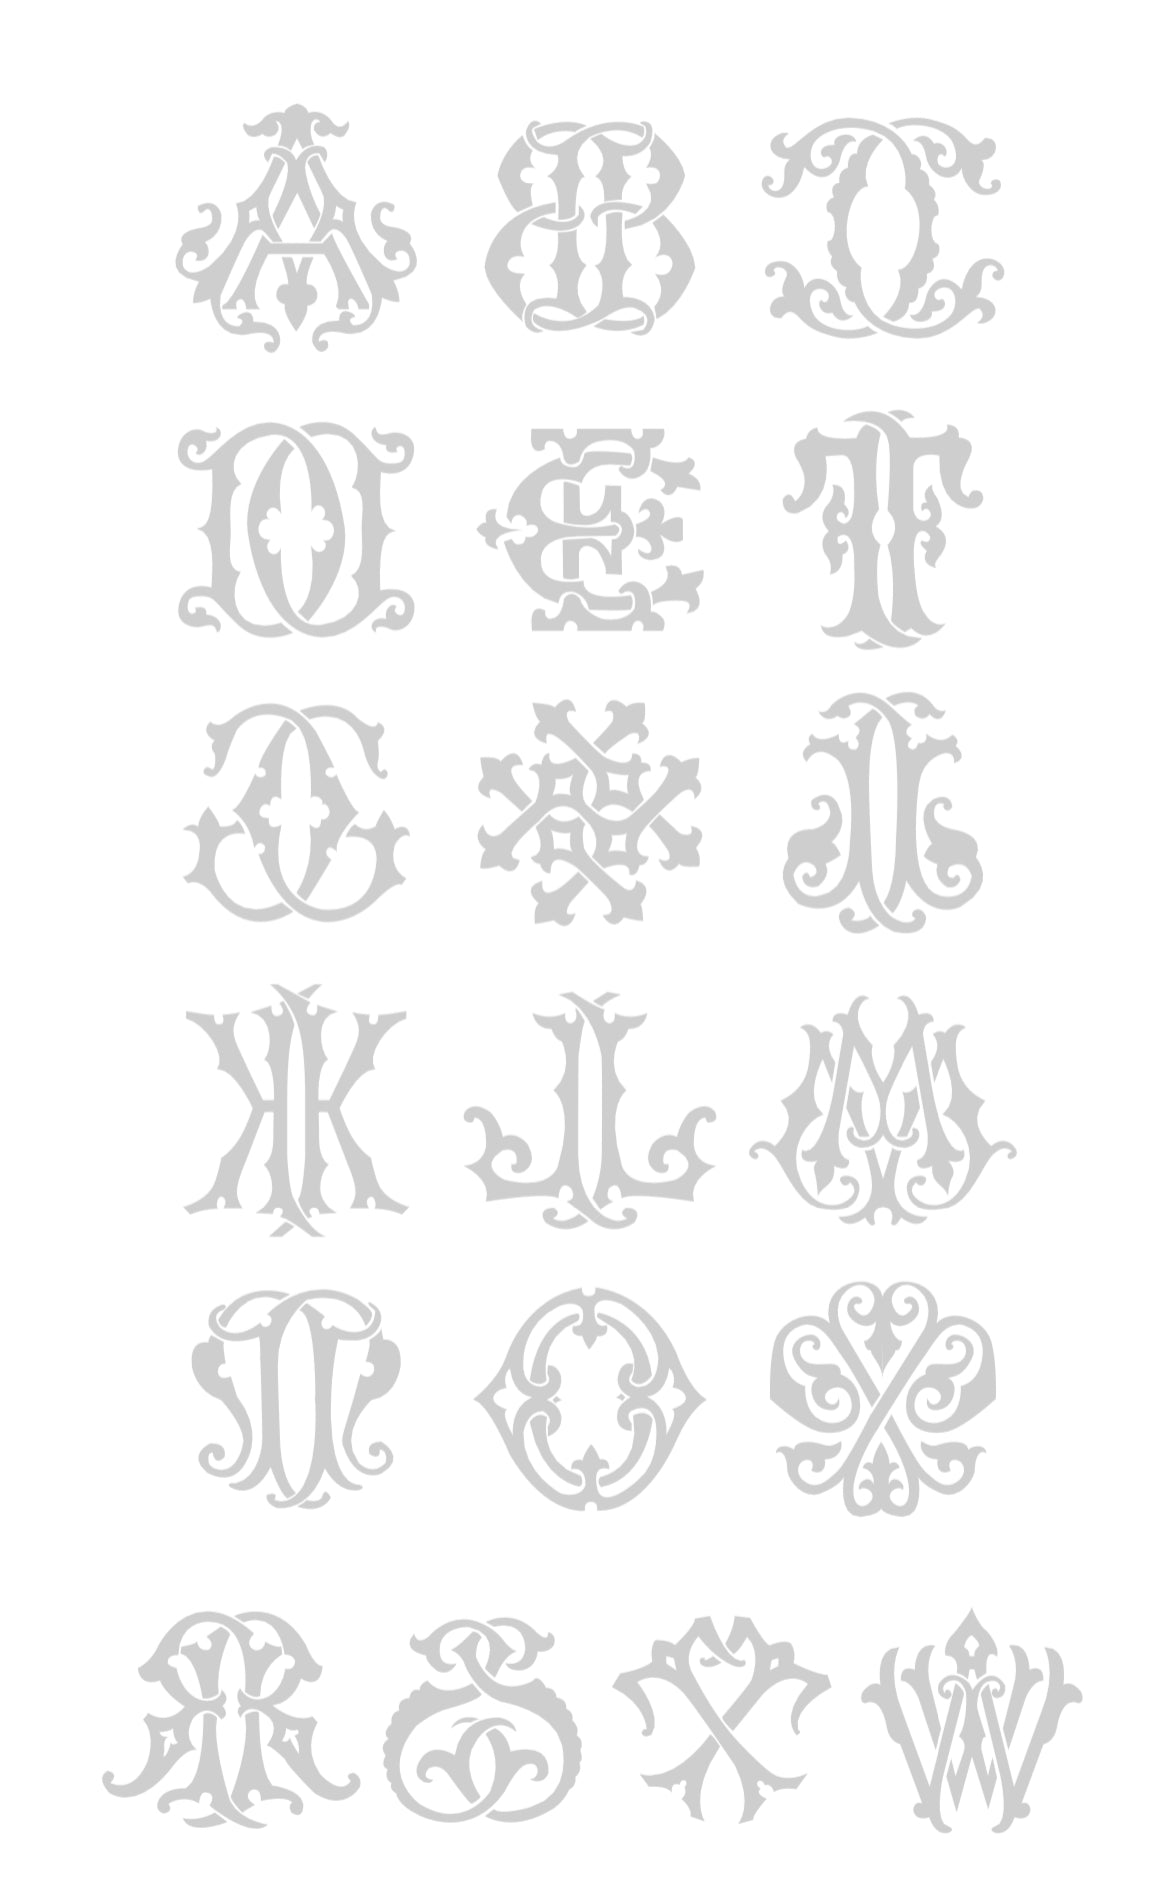 1-Letter Monogrammed Frosted Cups G